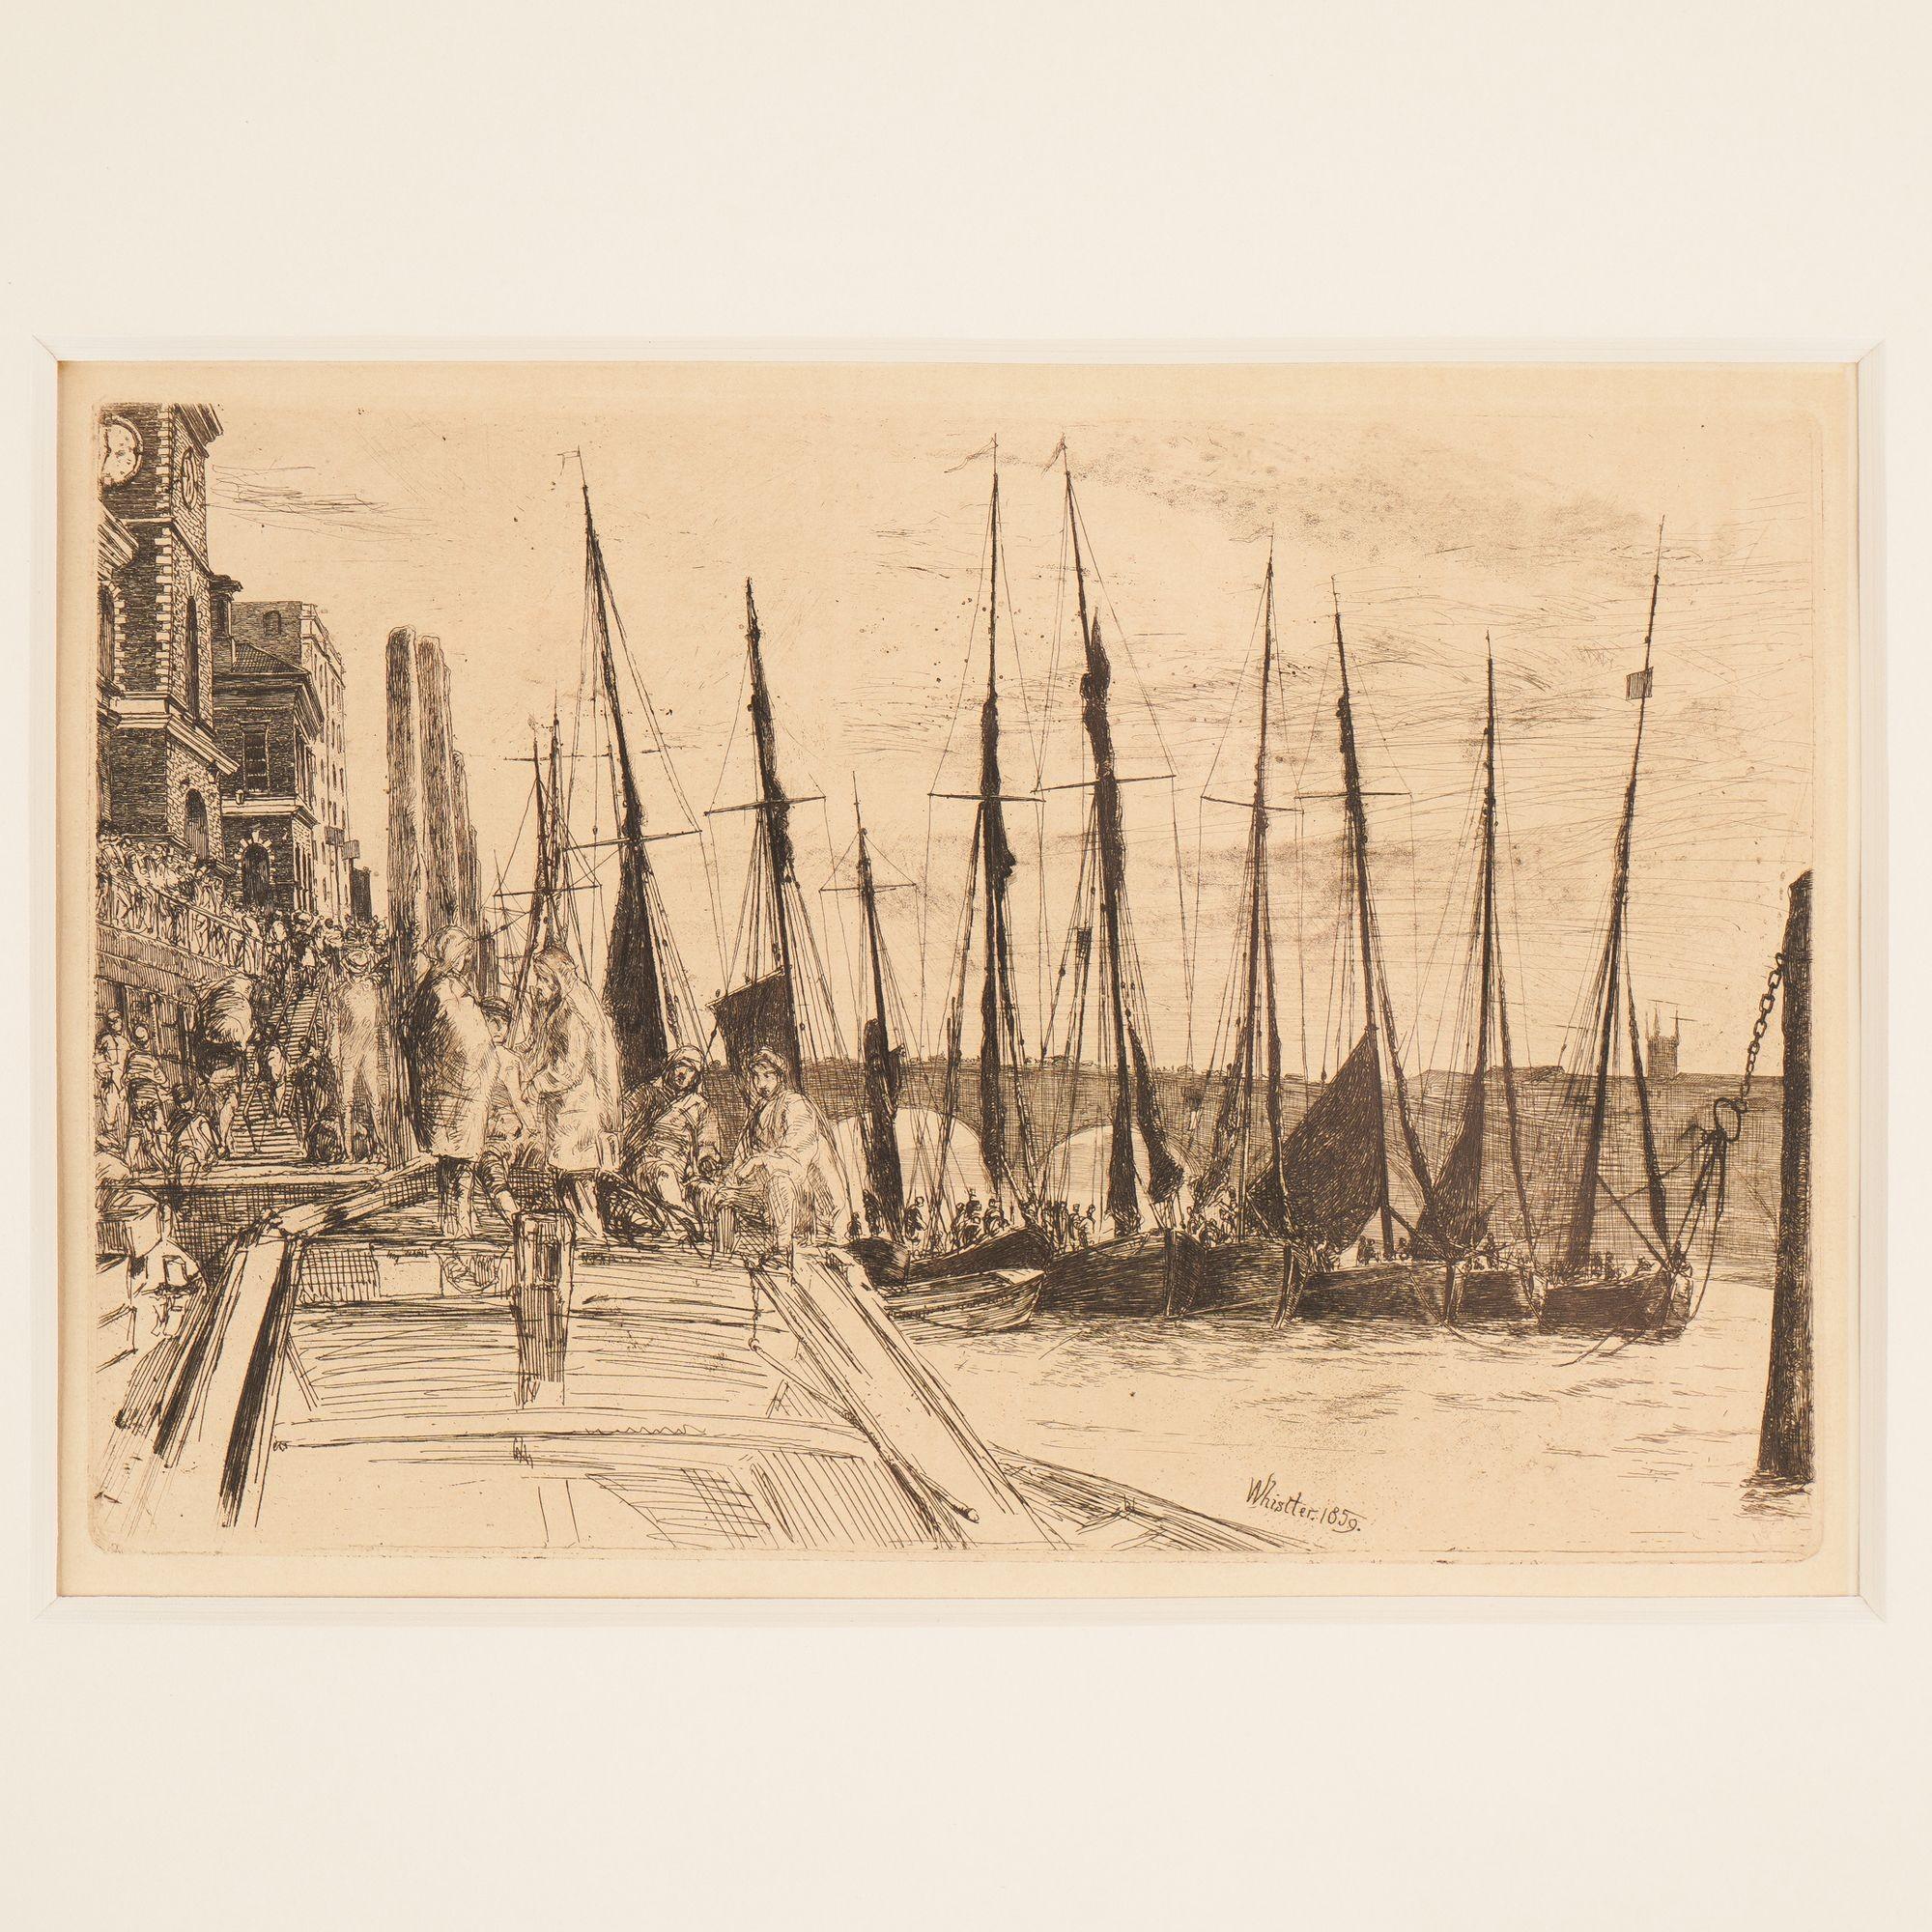 This ink etching depicts a busy dock scene from the perspective of someone in the stern of a boat. There are several figures in the bow of this boat who are wearing hats; three are seated and two standing figures face each other and appear to be